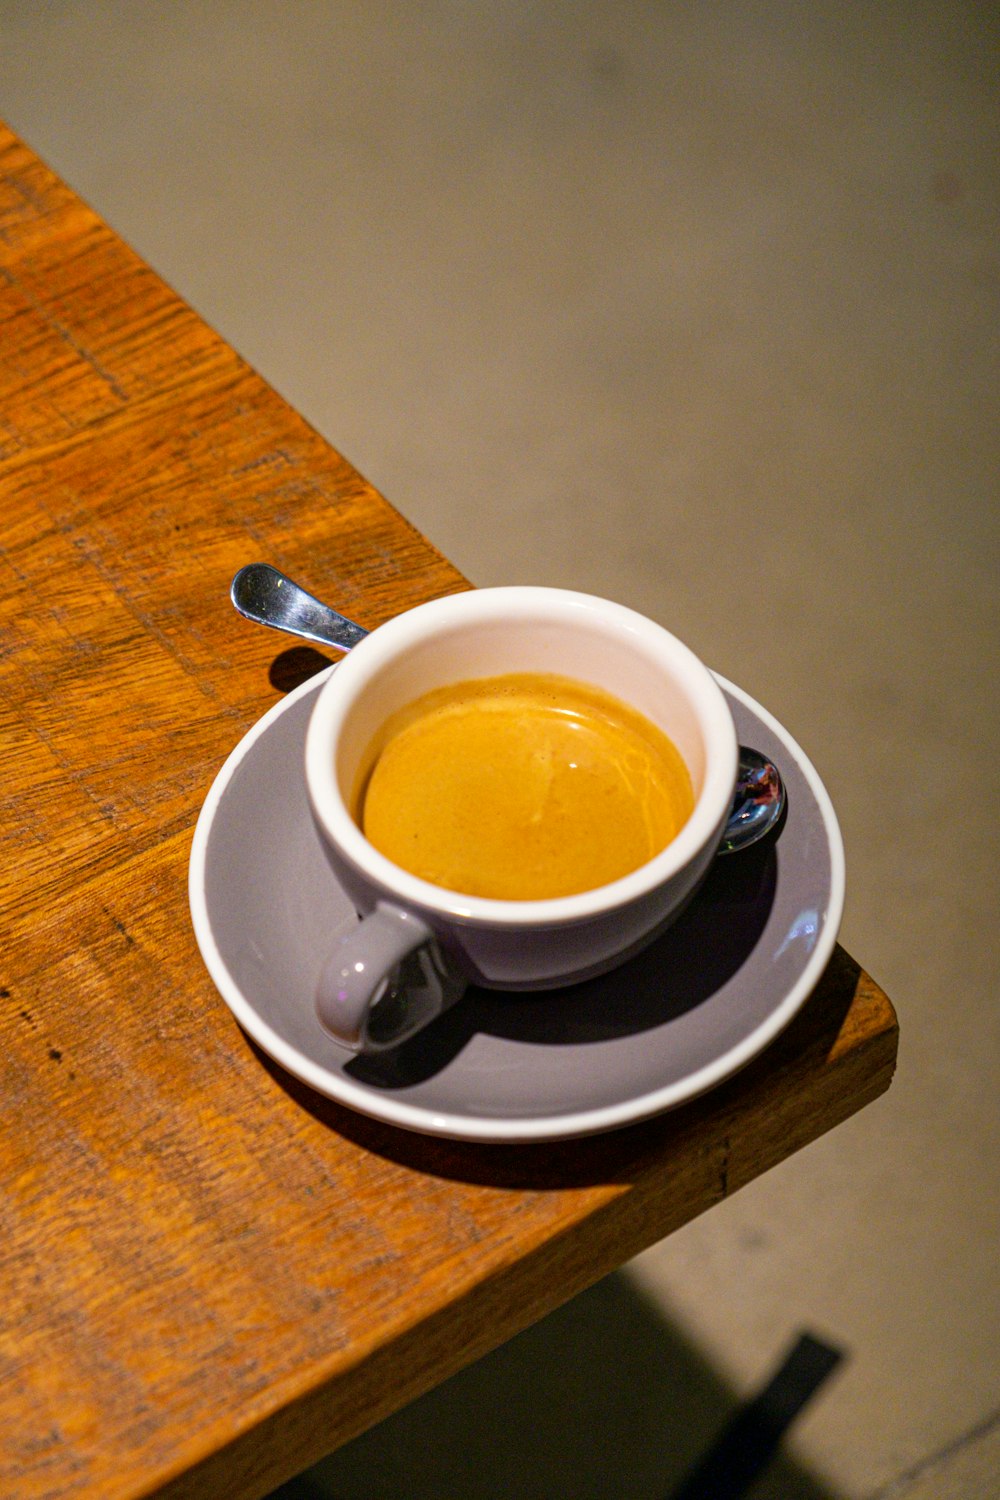 a cup of coffee on a saucer on a wooden table